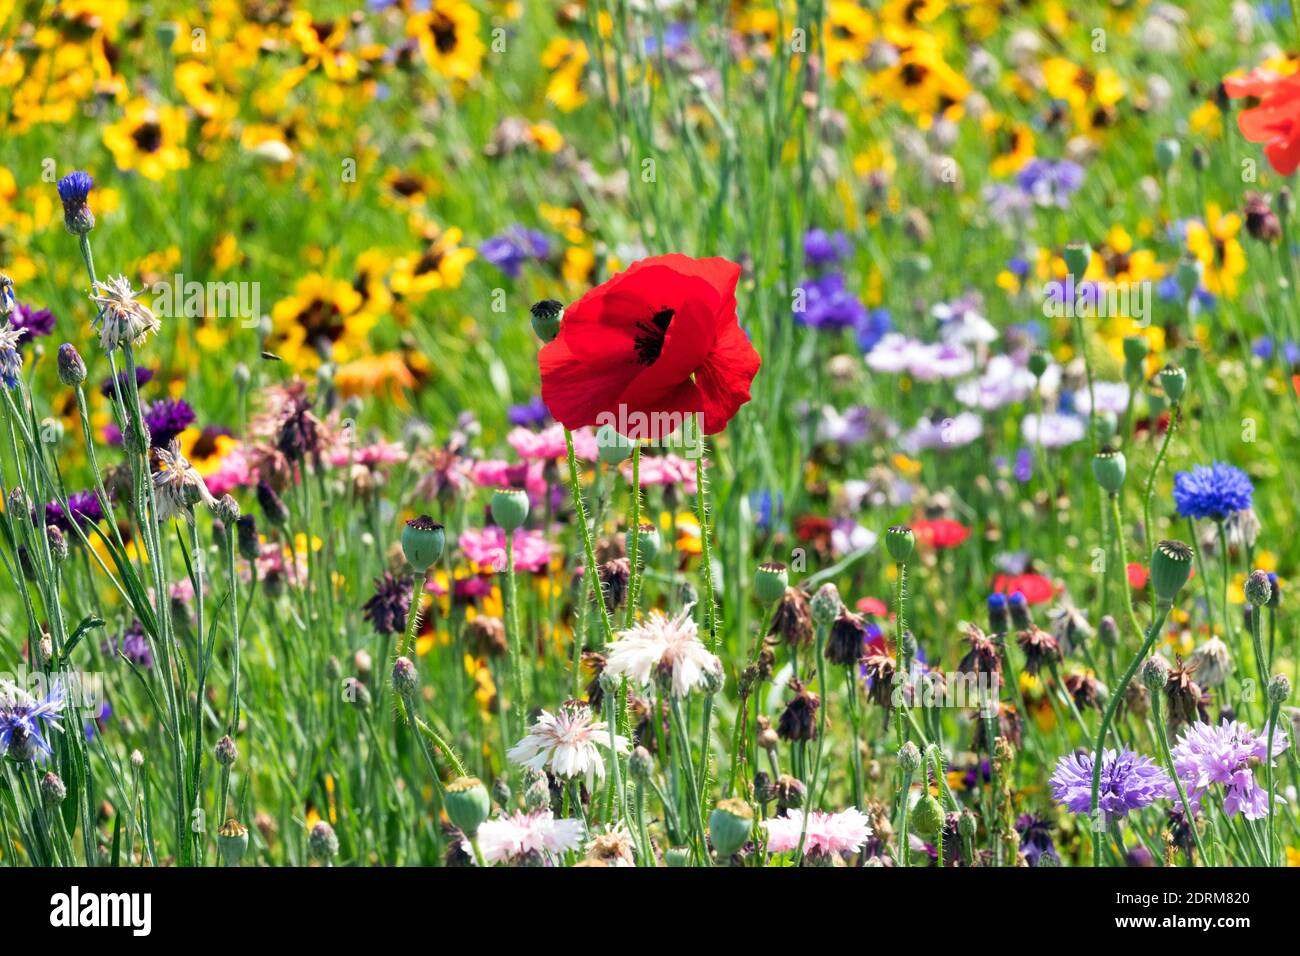 Summer flower Meadow Red Poppy Mixed Plants Colorful Wildflower Meadow Garden Flowers Papaver rhoeas Red Yellow Green Blue Flowering July Mixed Flower Stock Photo